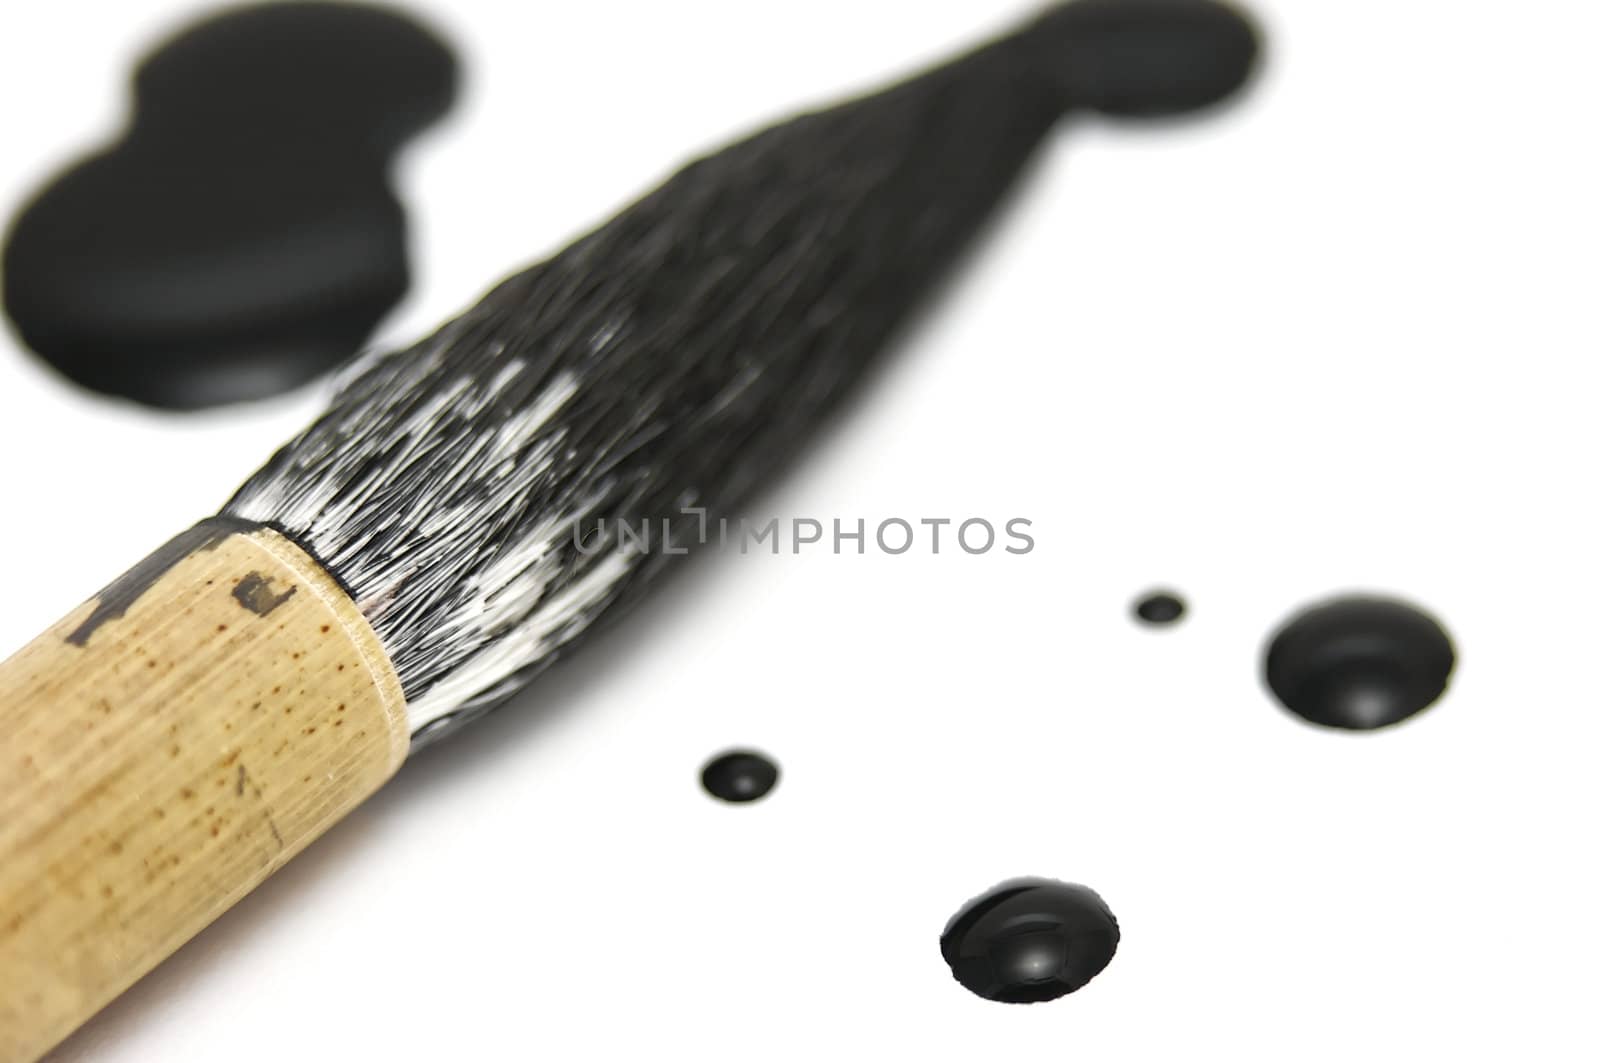 Black chinese ink dots with a calligraphy brush resting nearby. This is a close macro shot with very low depth of field.